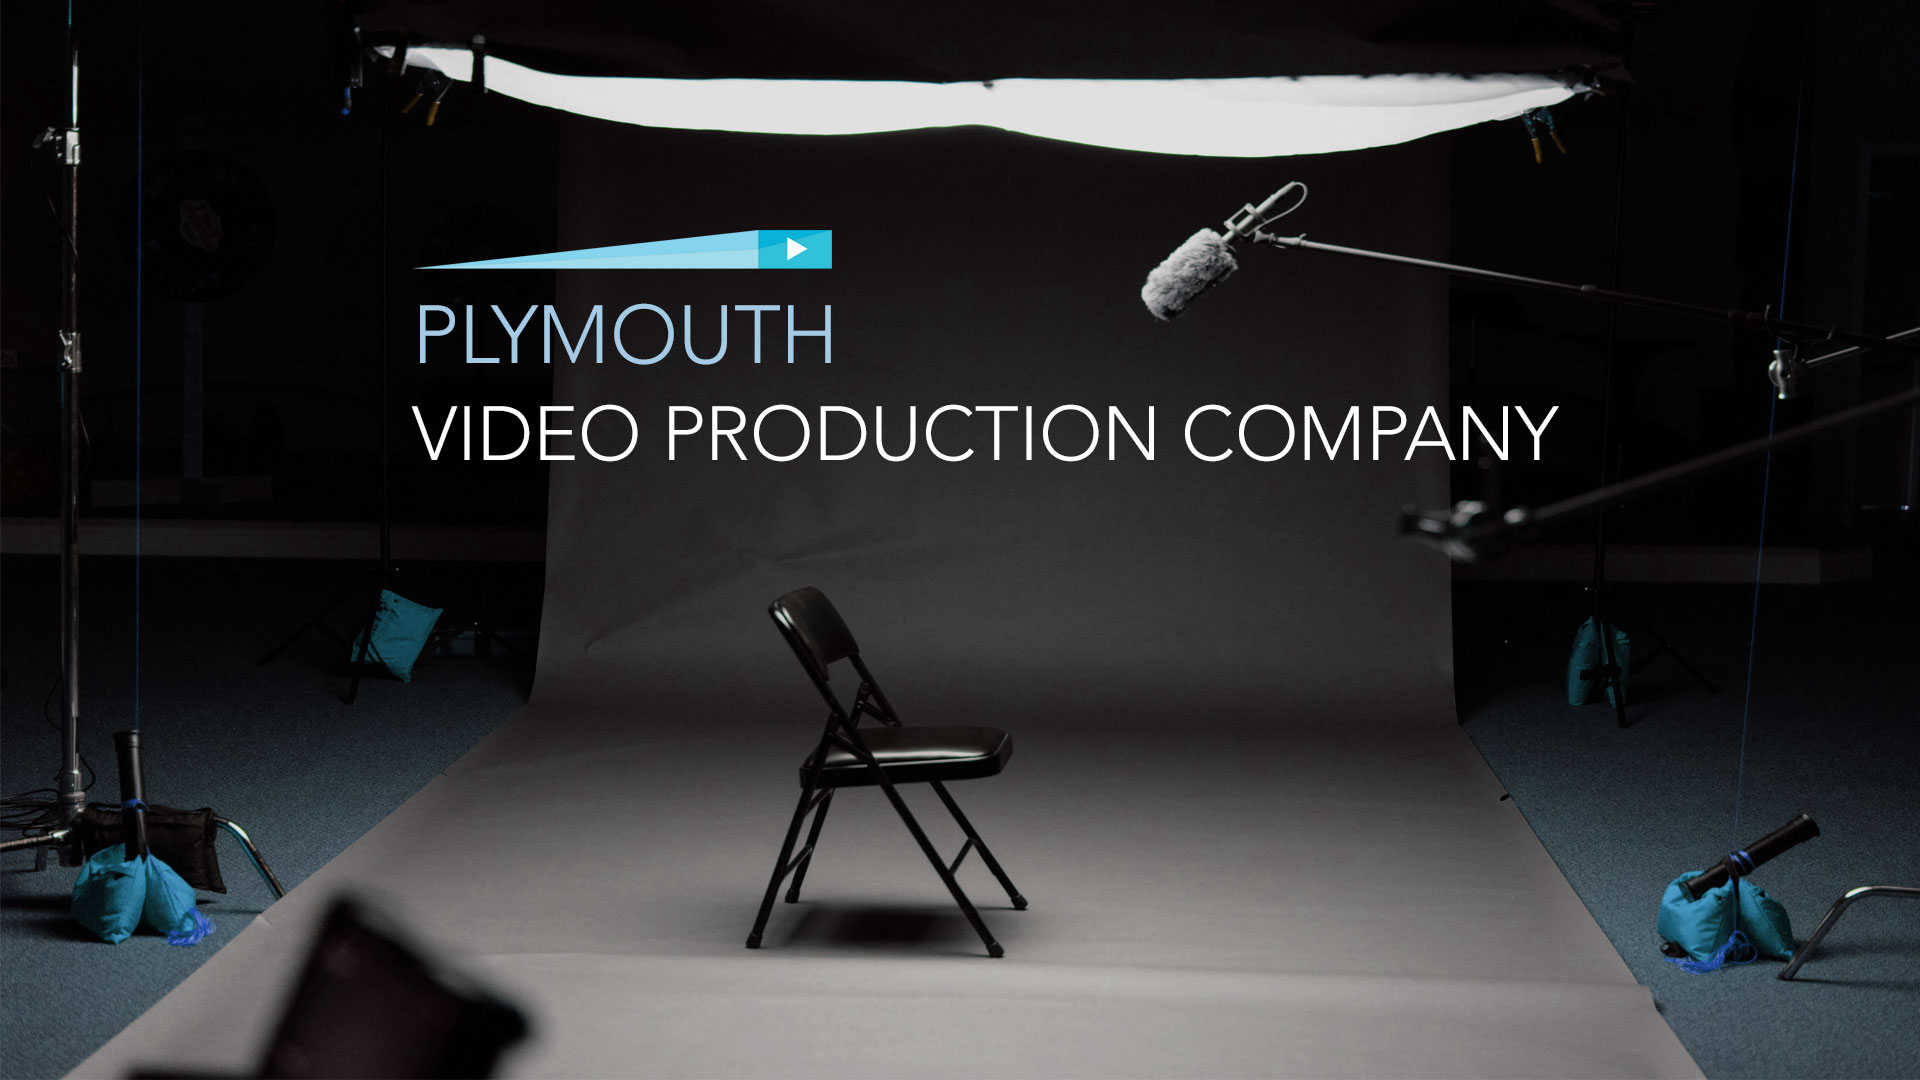 Plymouth Video Production Company